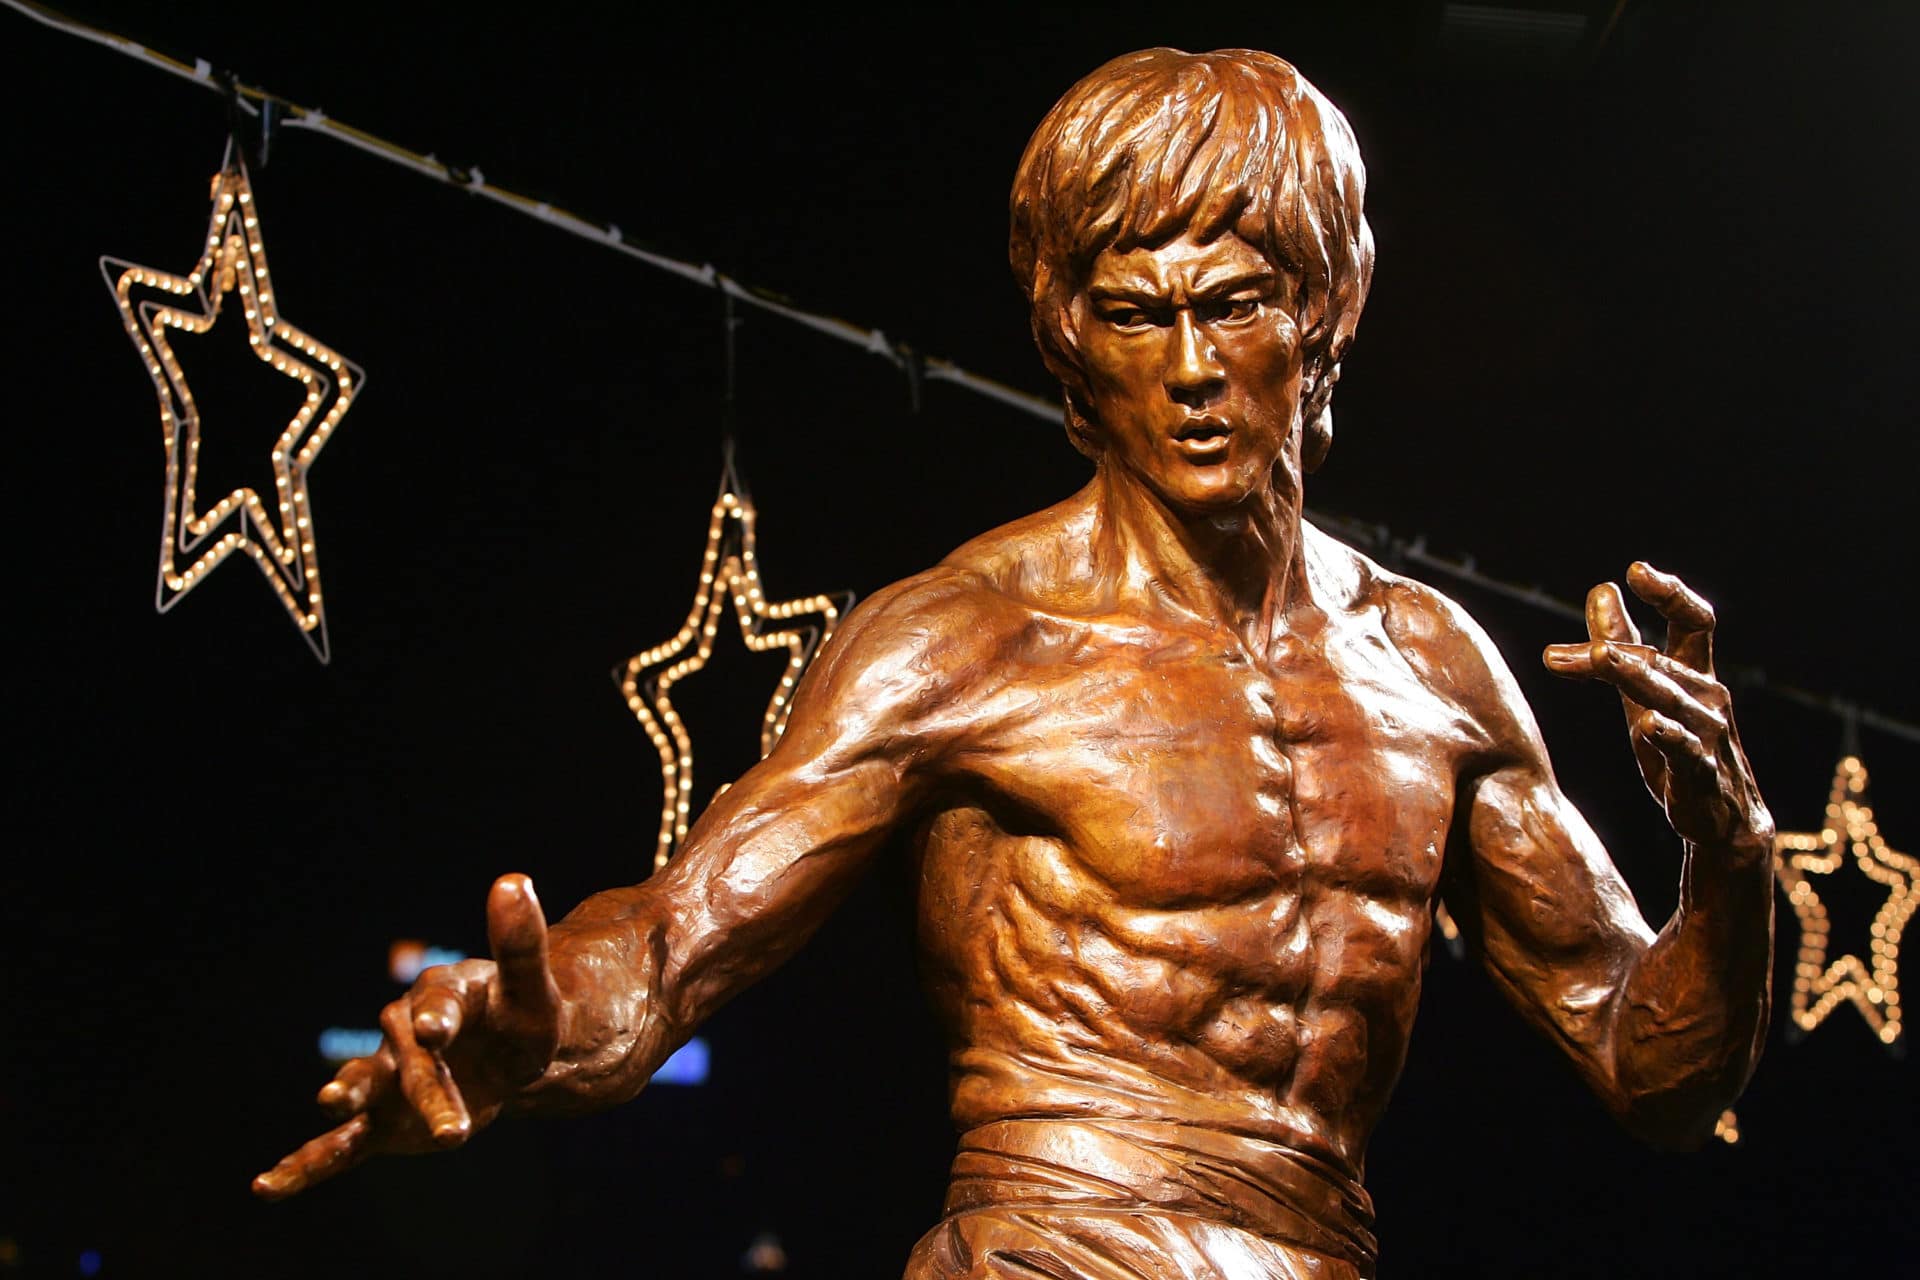 What killed Bruce Lee? 4 leading theories medical and martial arts